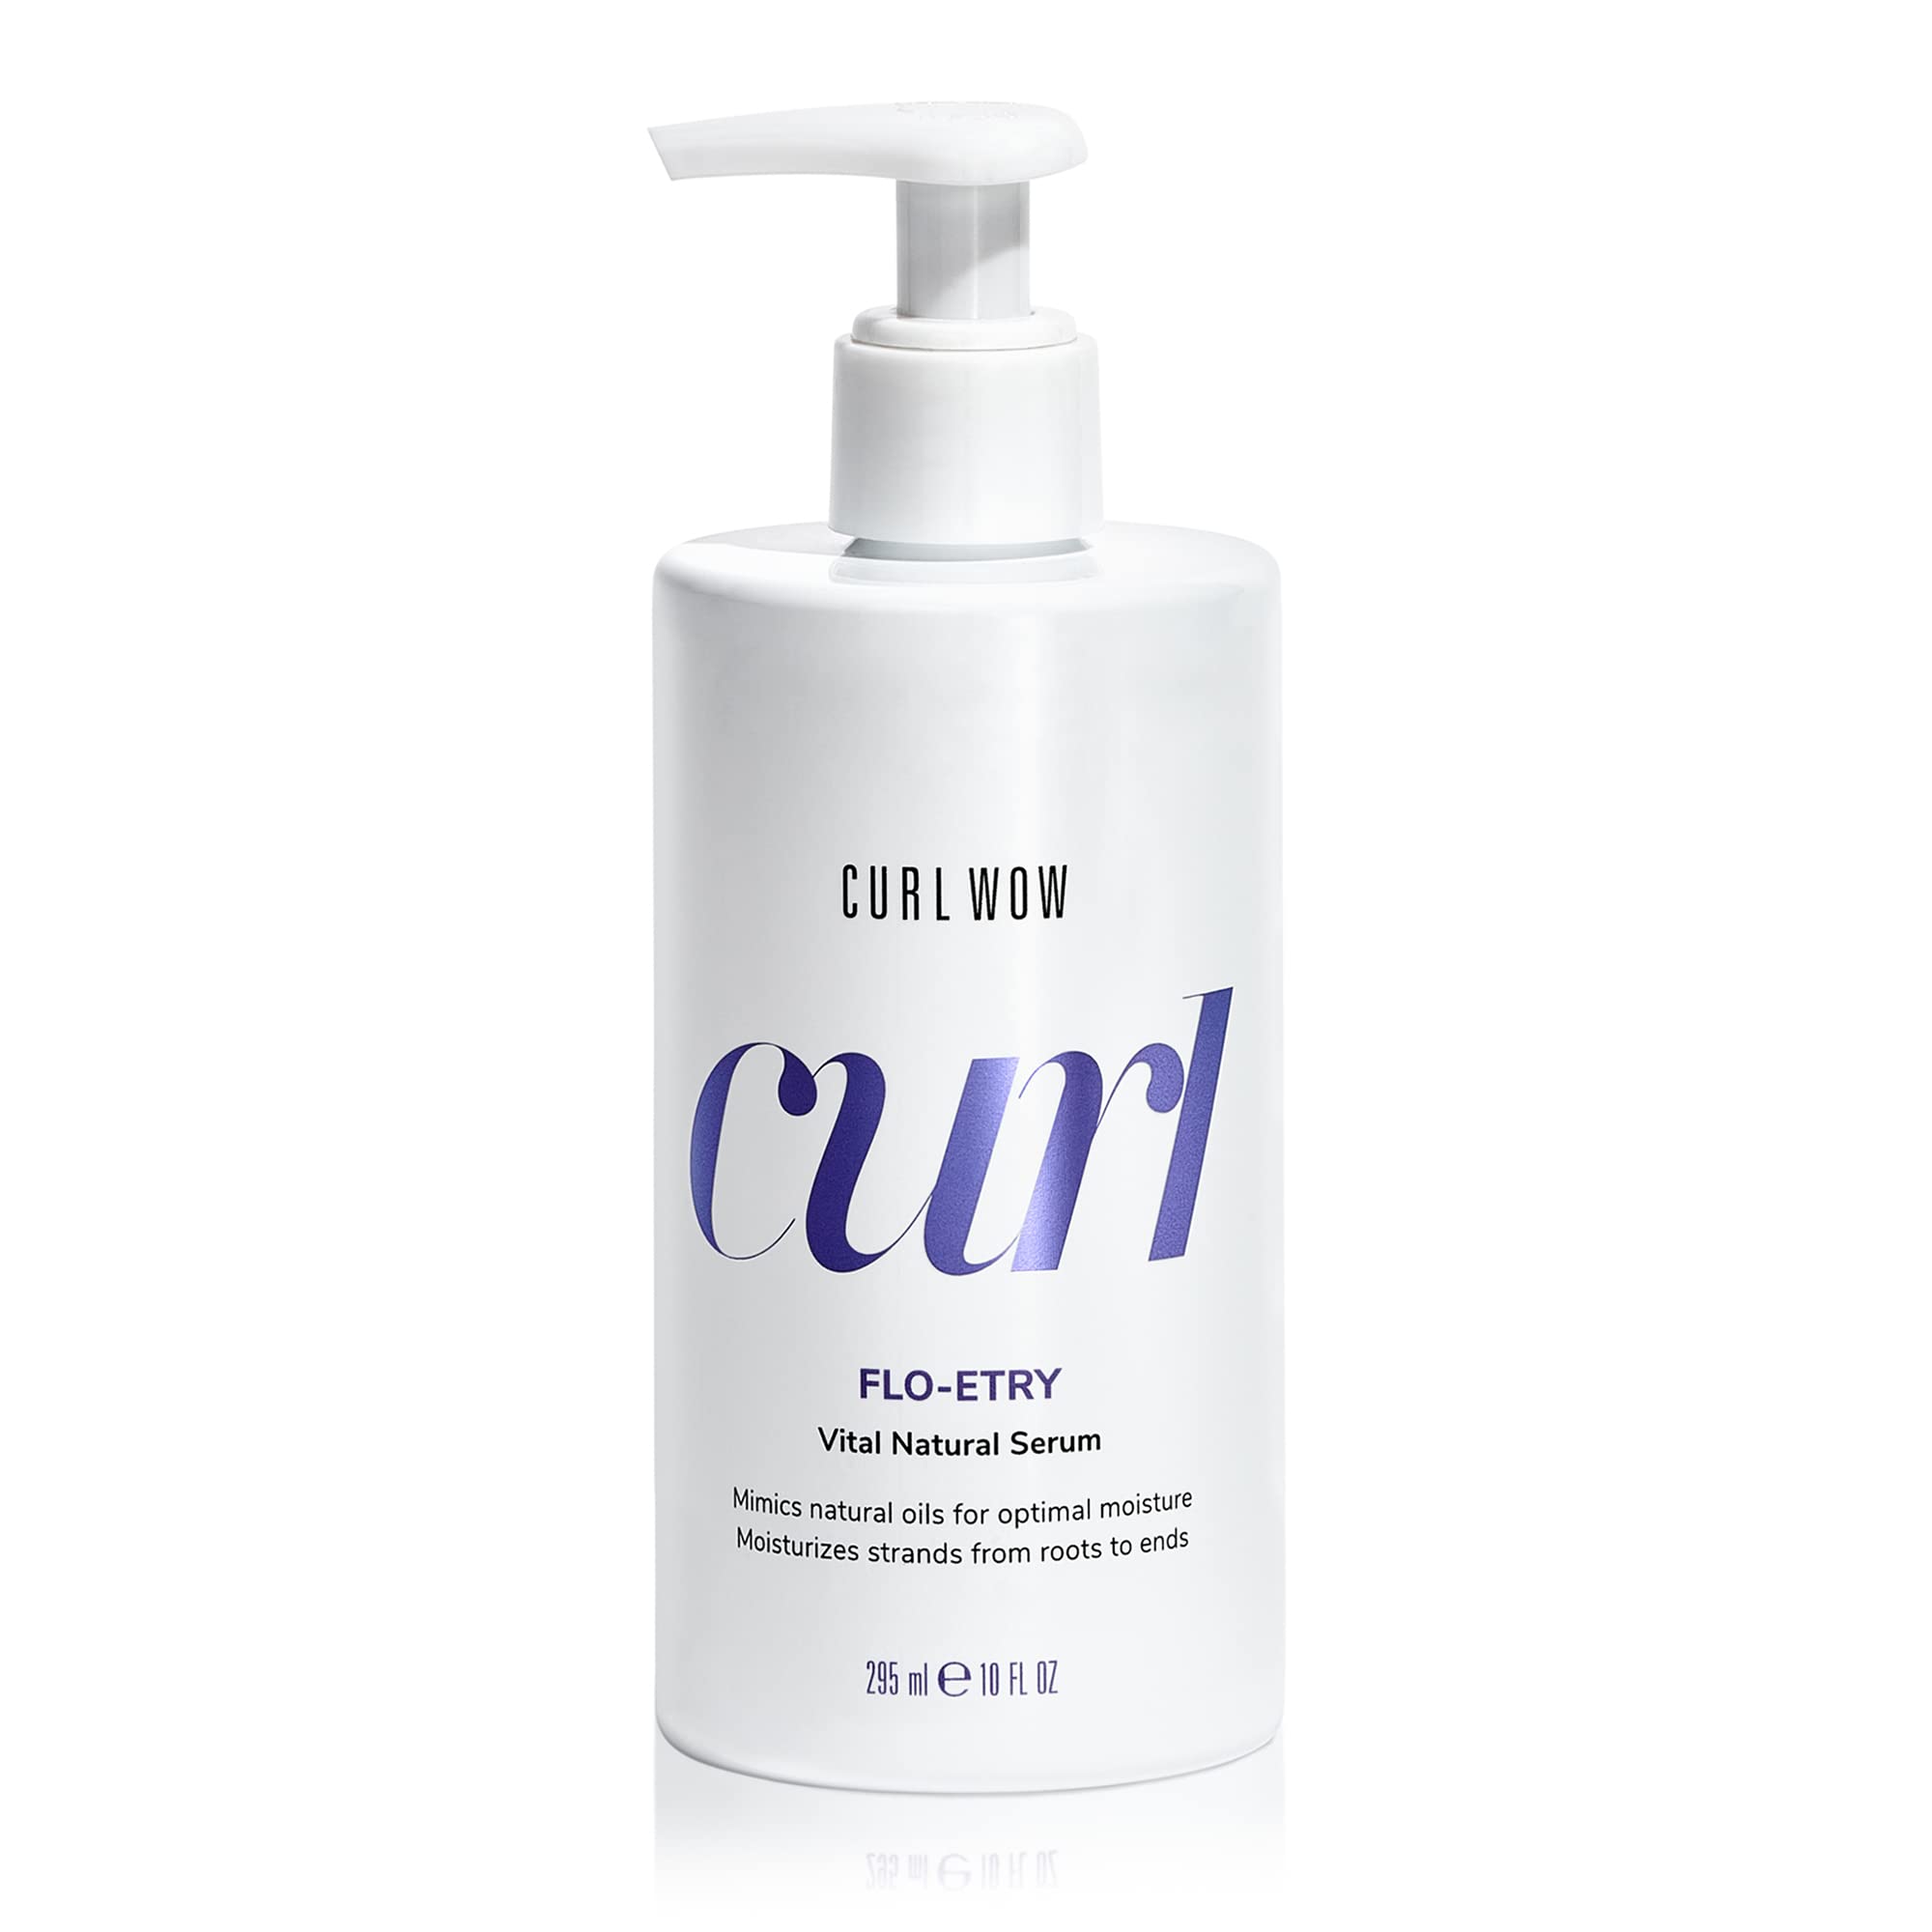 Color Wow Curl Wow Curly Hair Products for Conditioning, Bundling, Moisturizing, Cleansing, and Detangling